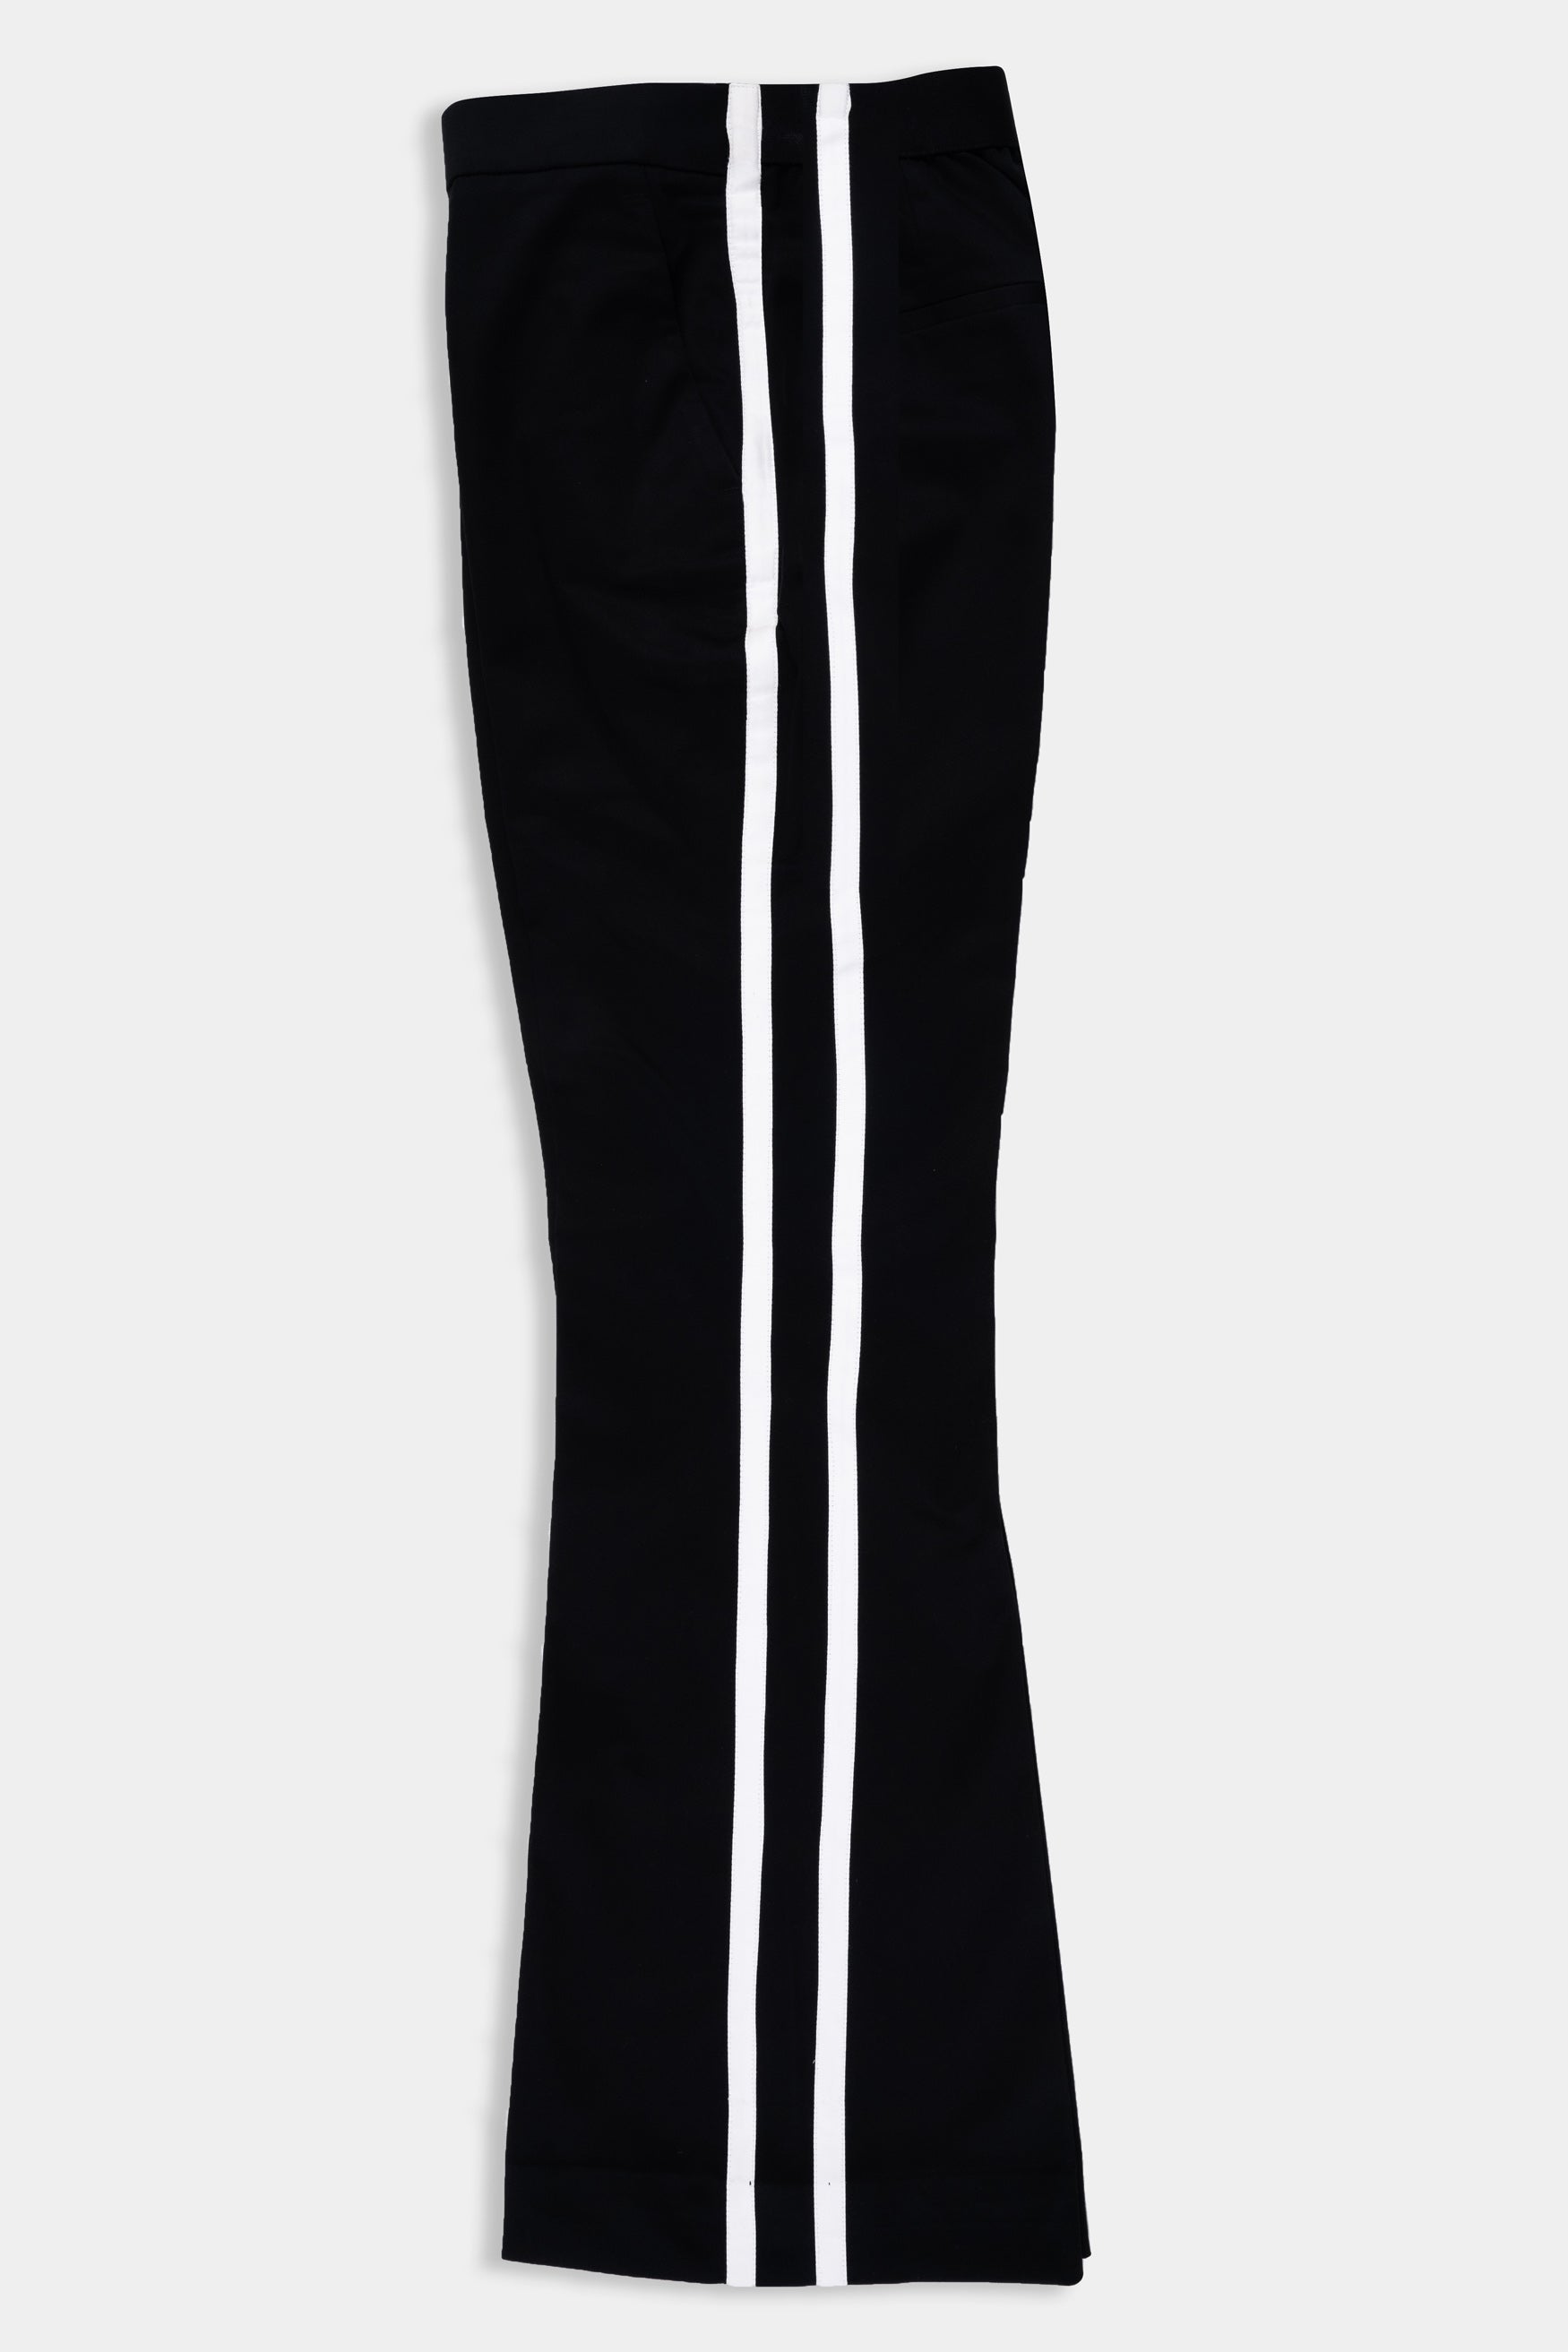 Jade Black with White Dual Stripes Wool Rich Women’s Pant